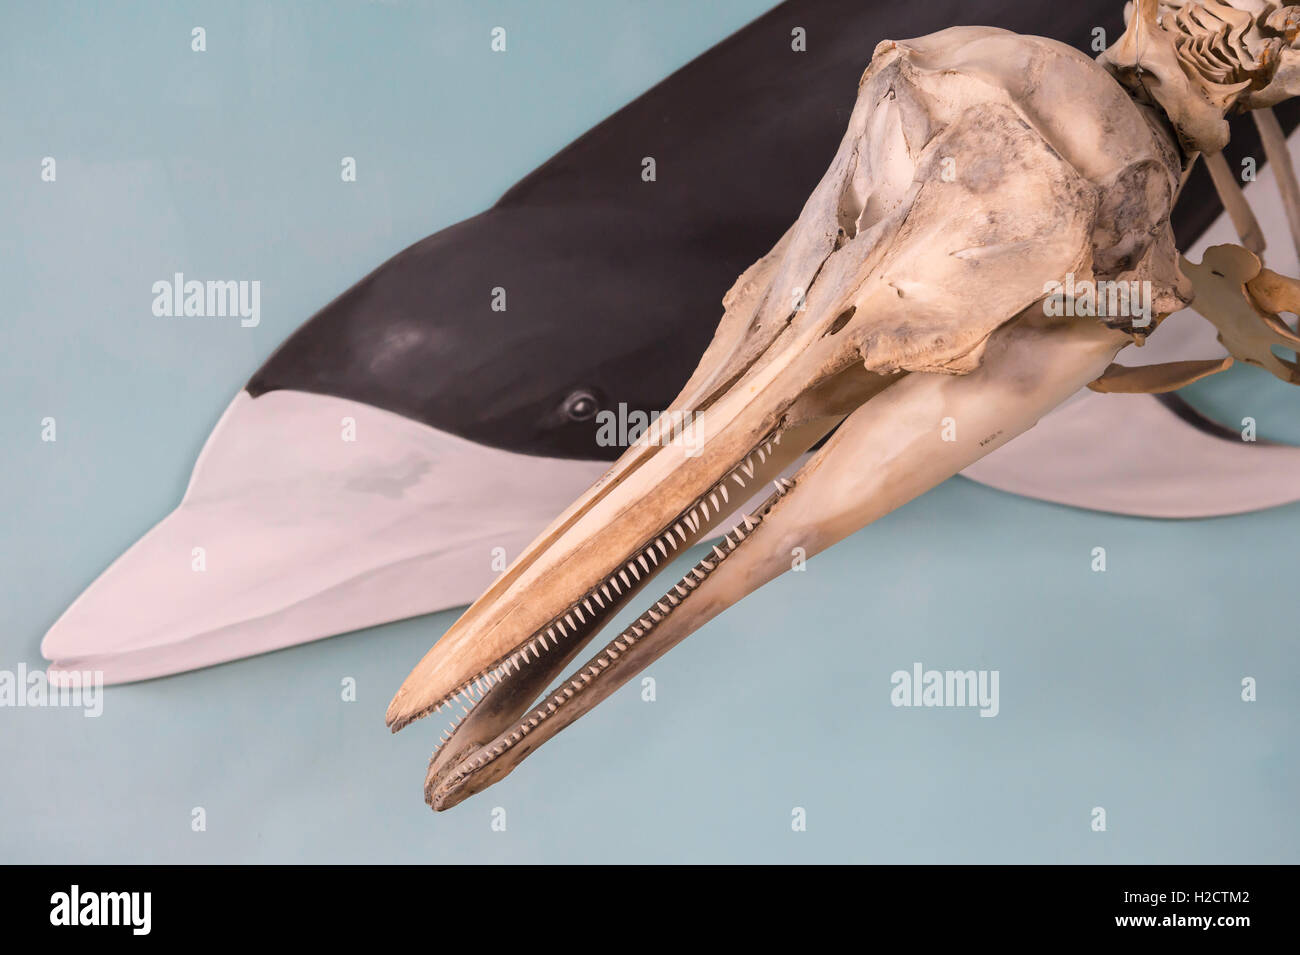 Skull of Southern right whale dolphin, Lissodelphis peronii, Haberton Whale Museum, Ushuaia, Tierra del Fuego, Argentina Stock Photo